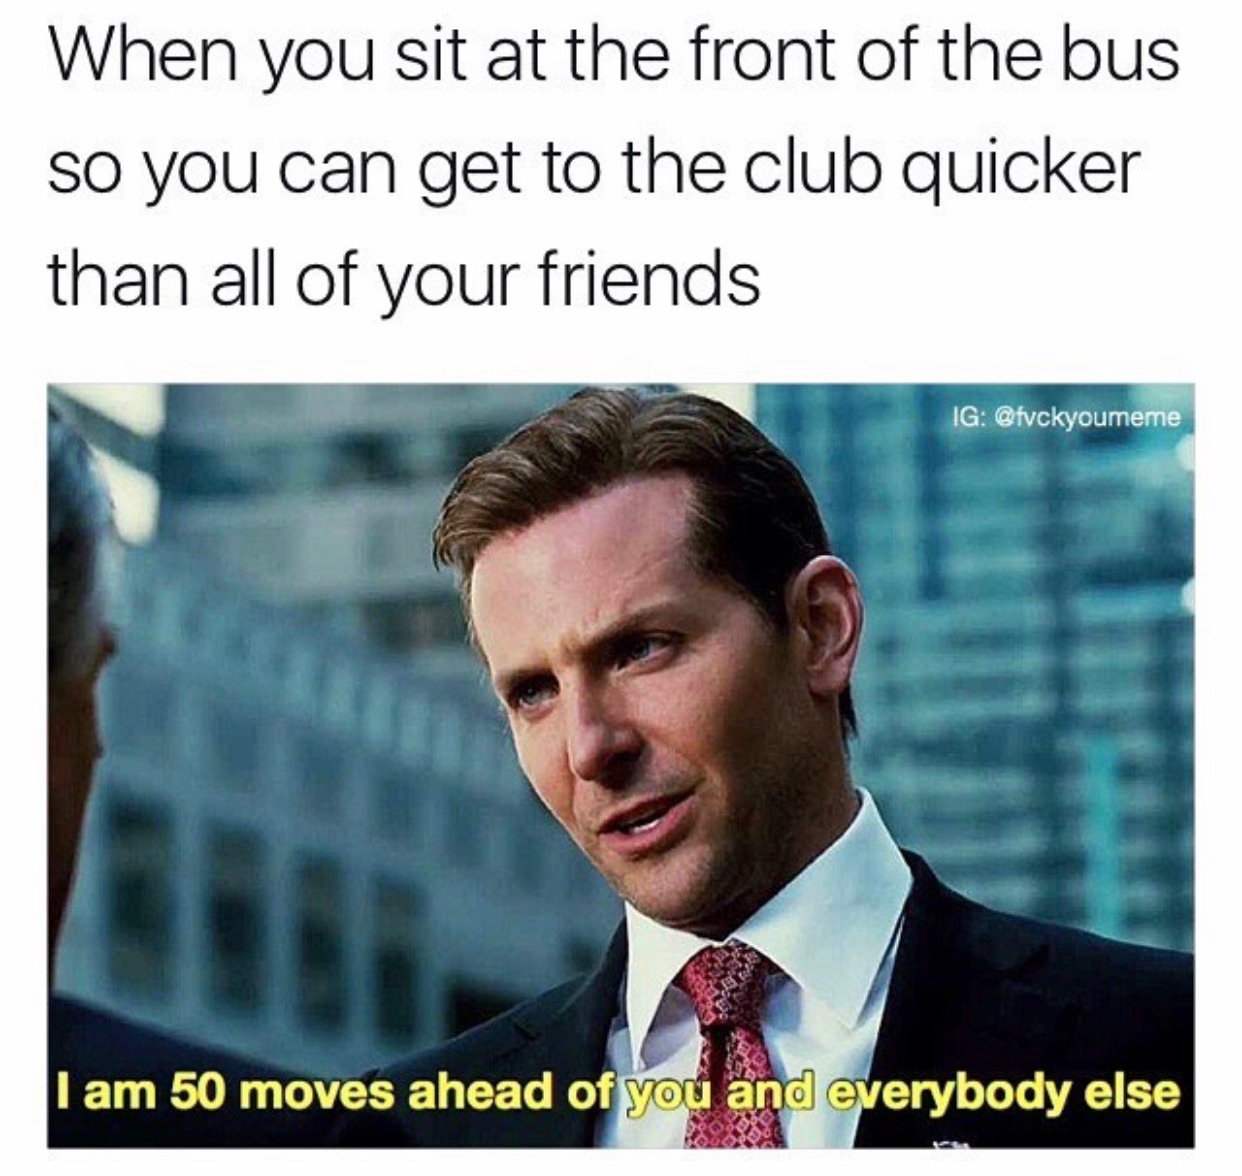 memes - bradley cooper limitless - When you sit at the front of the bus so you can get to the club quicker than all of your friends Ig I am 50 moves ahead of you and everybody else